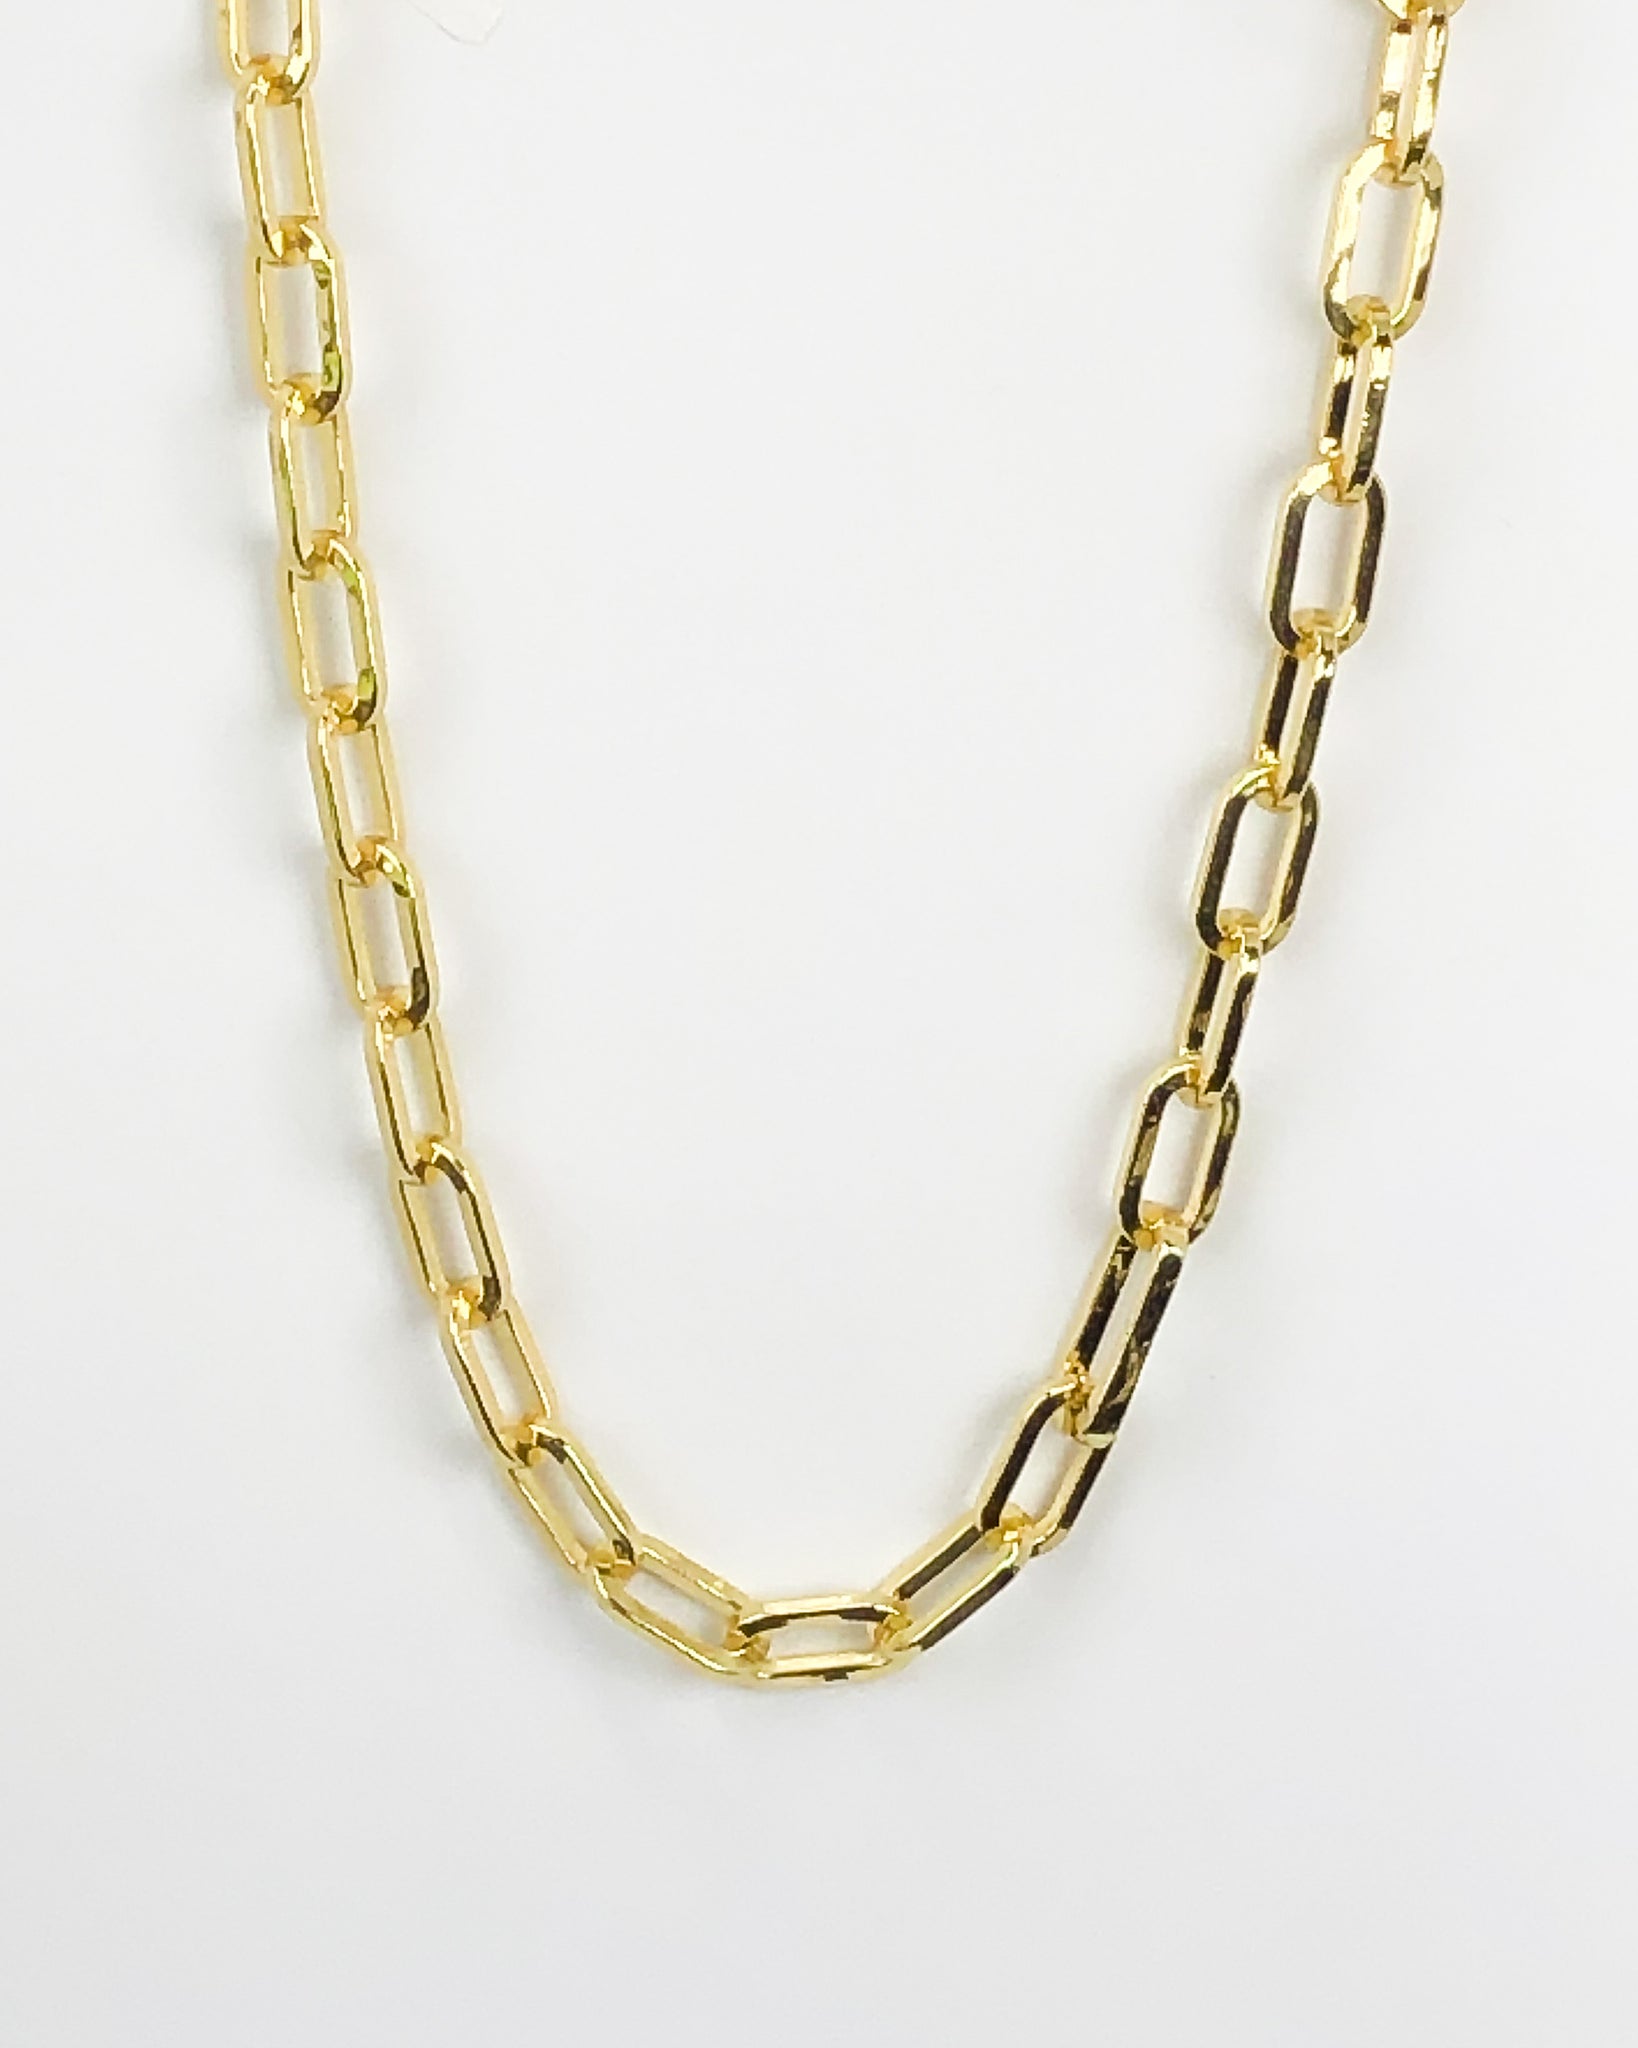 Buy 18k Gold Chain Necklace Women, Chunky Choker, Online in India - Etsy